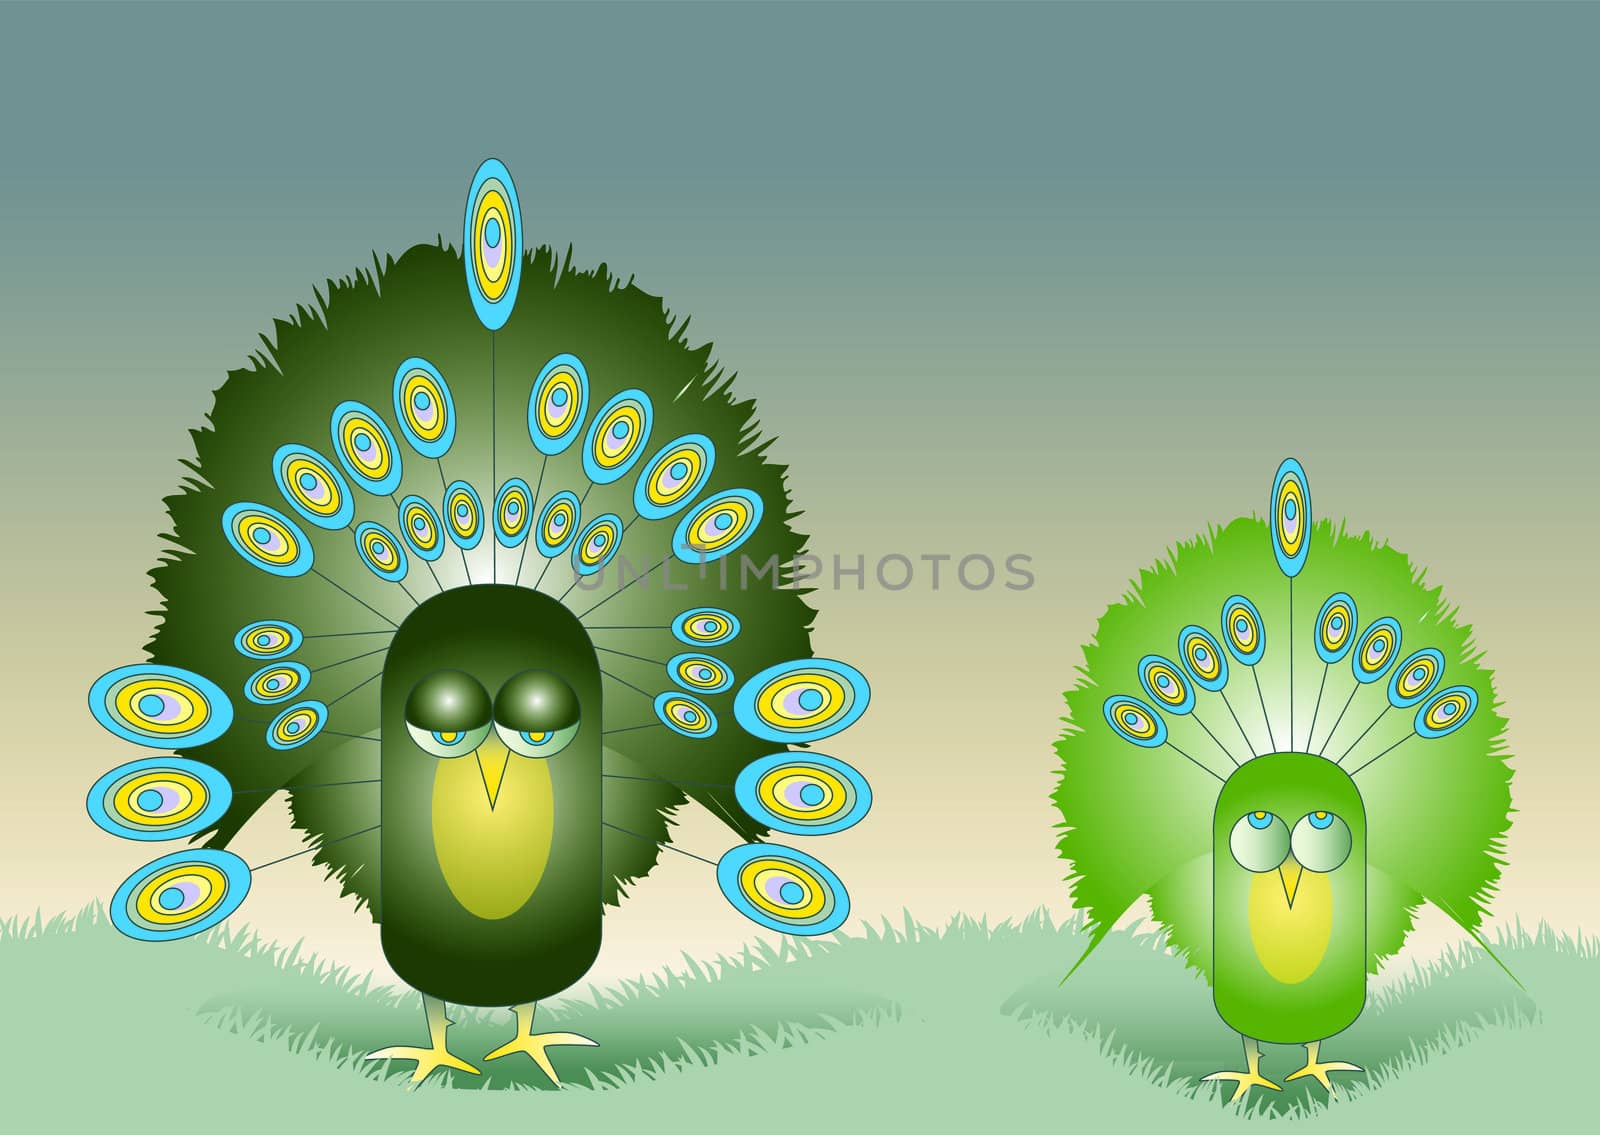 A Hand drawn Illustration of two stylized green colored peacocks with ornate feather decoration. One an adult the other a juvenile, set on a gradated background in front of green grass.